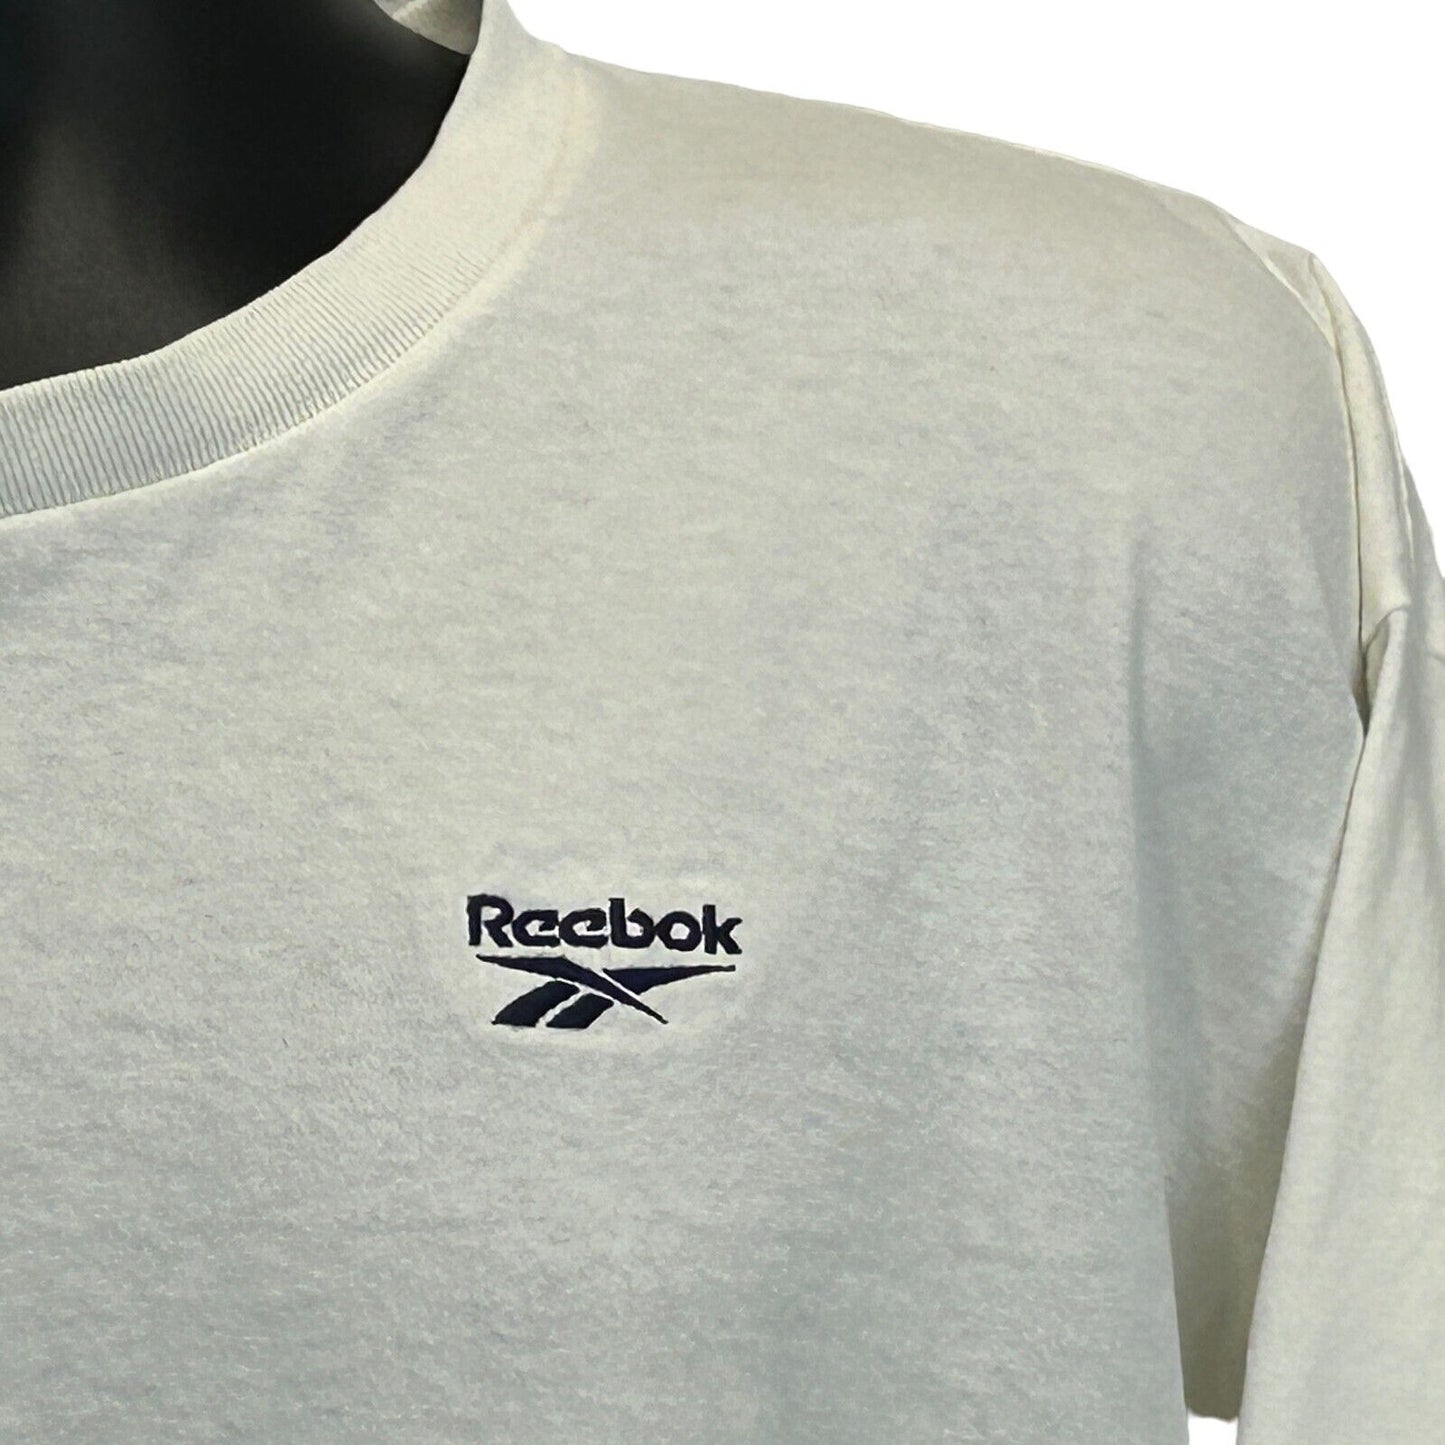 Reebok Vintage 90s T Shirt Embroidered Long Sleeve White Made In USA Tee 2XL XXL